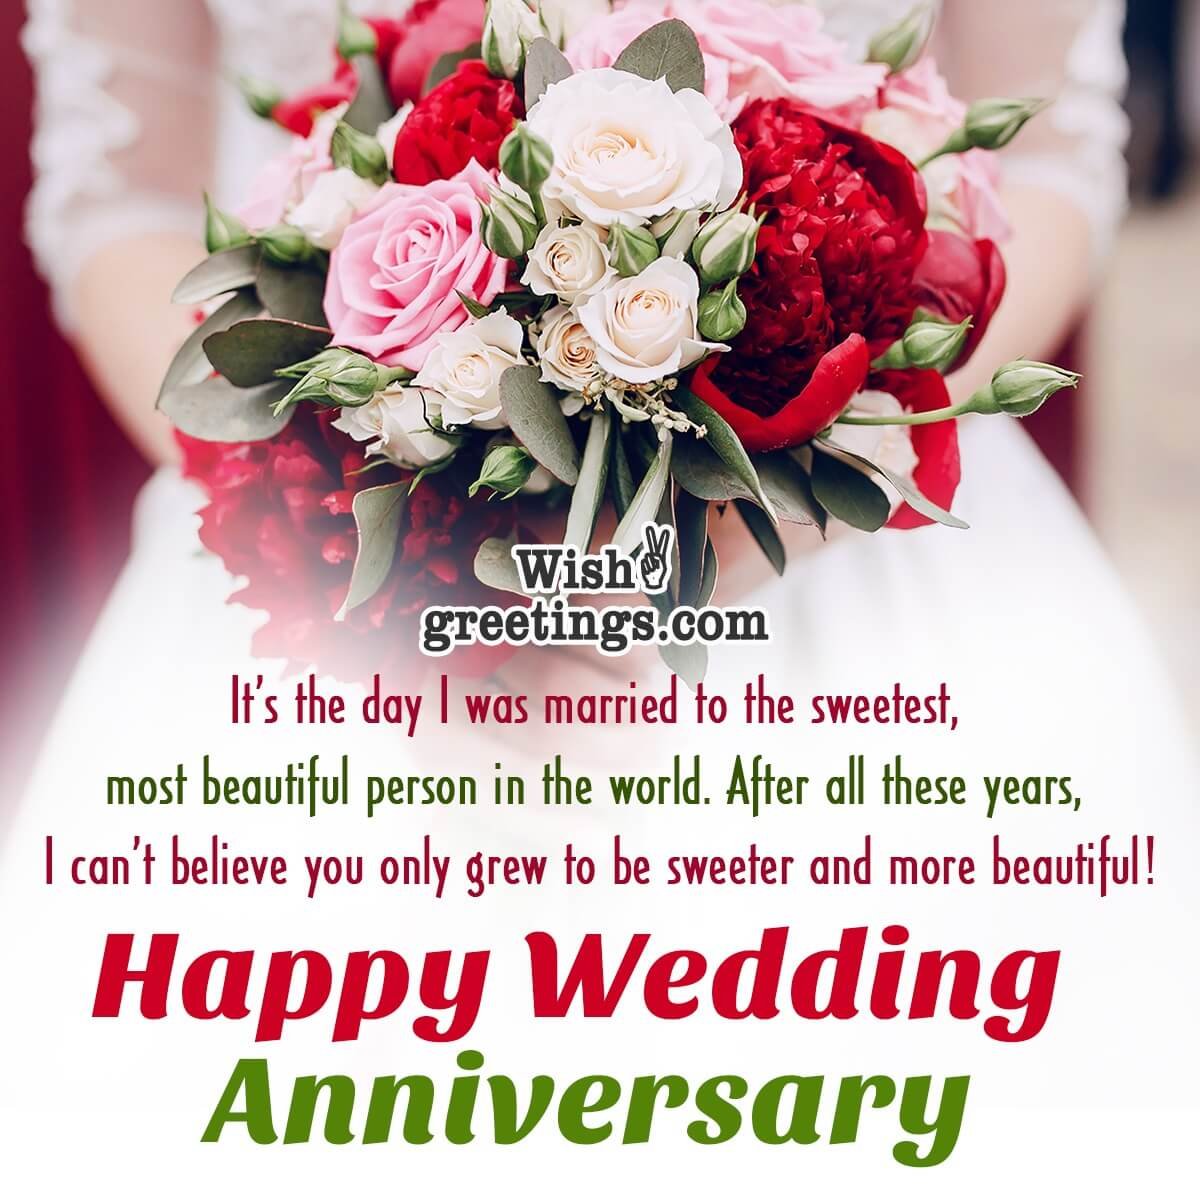 Marriage Anniversary Messages - Wish Greetings